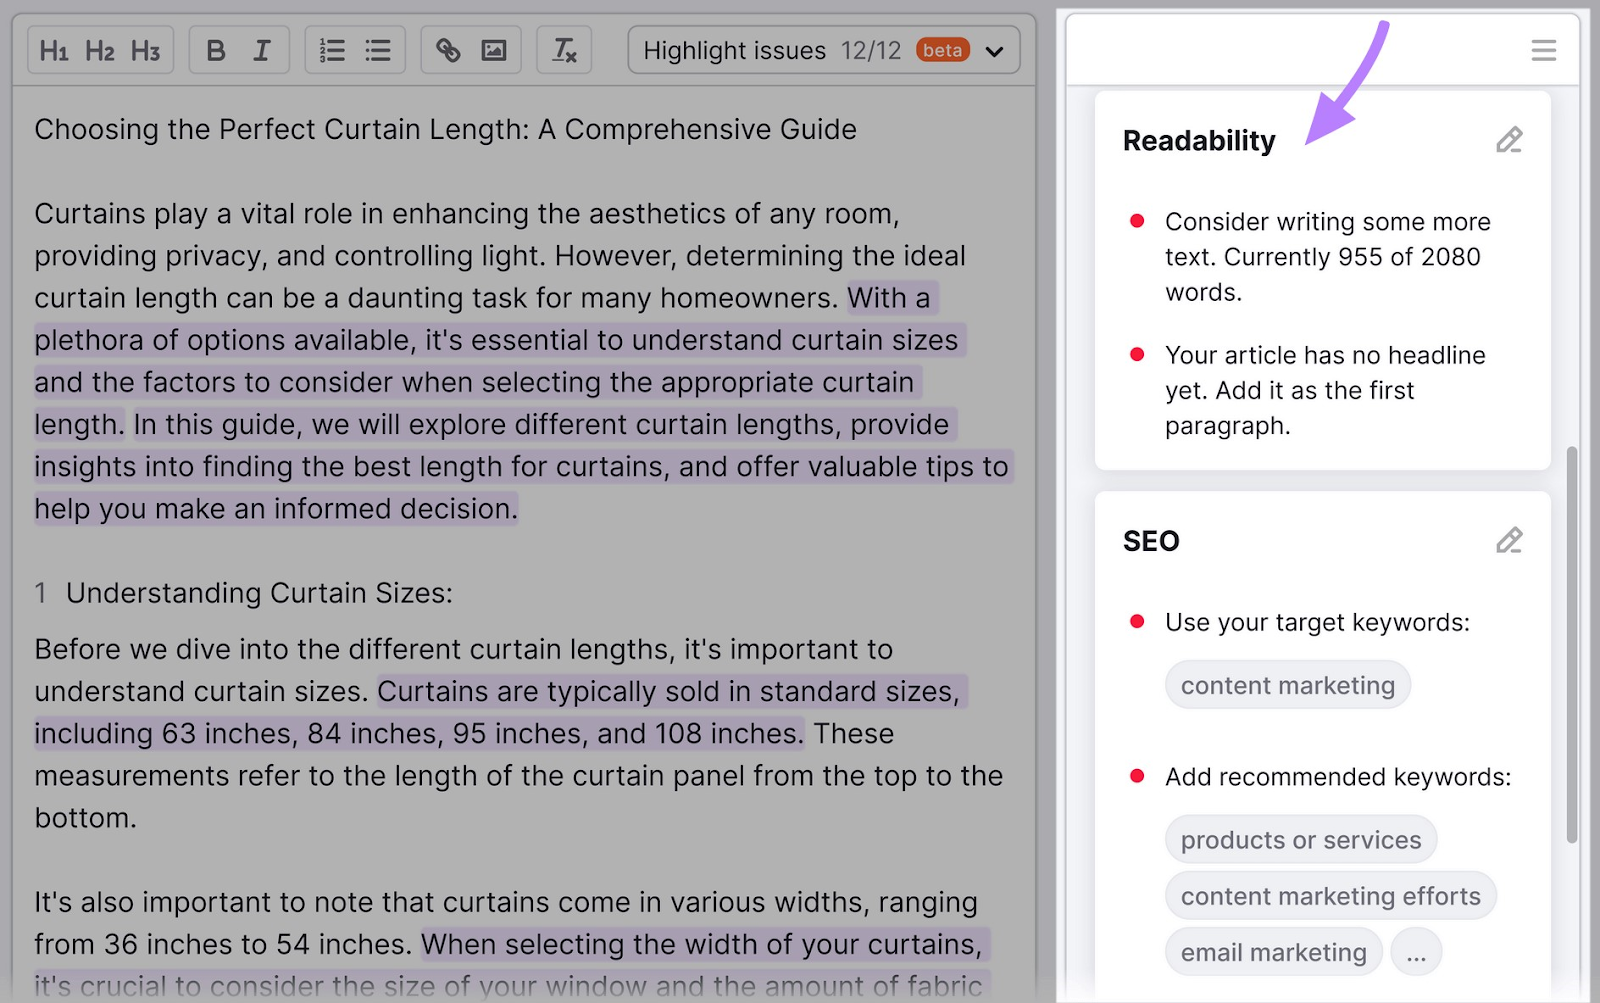 “Readability” and “SEO” recommendations on the right side